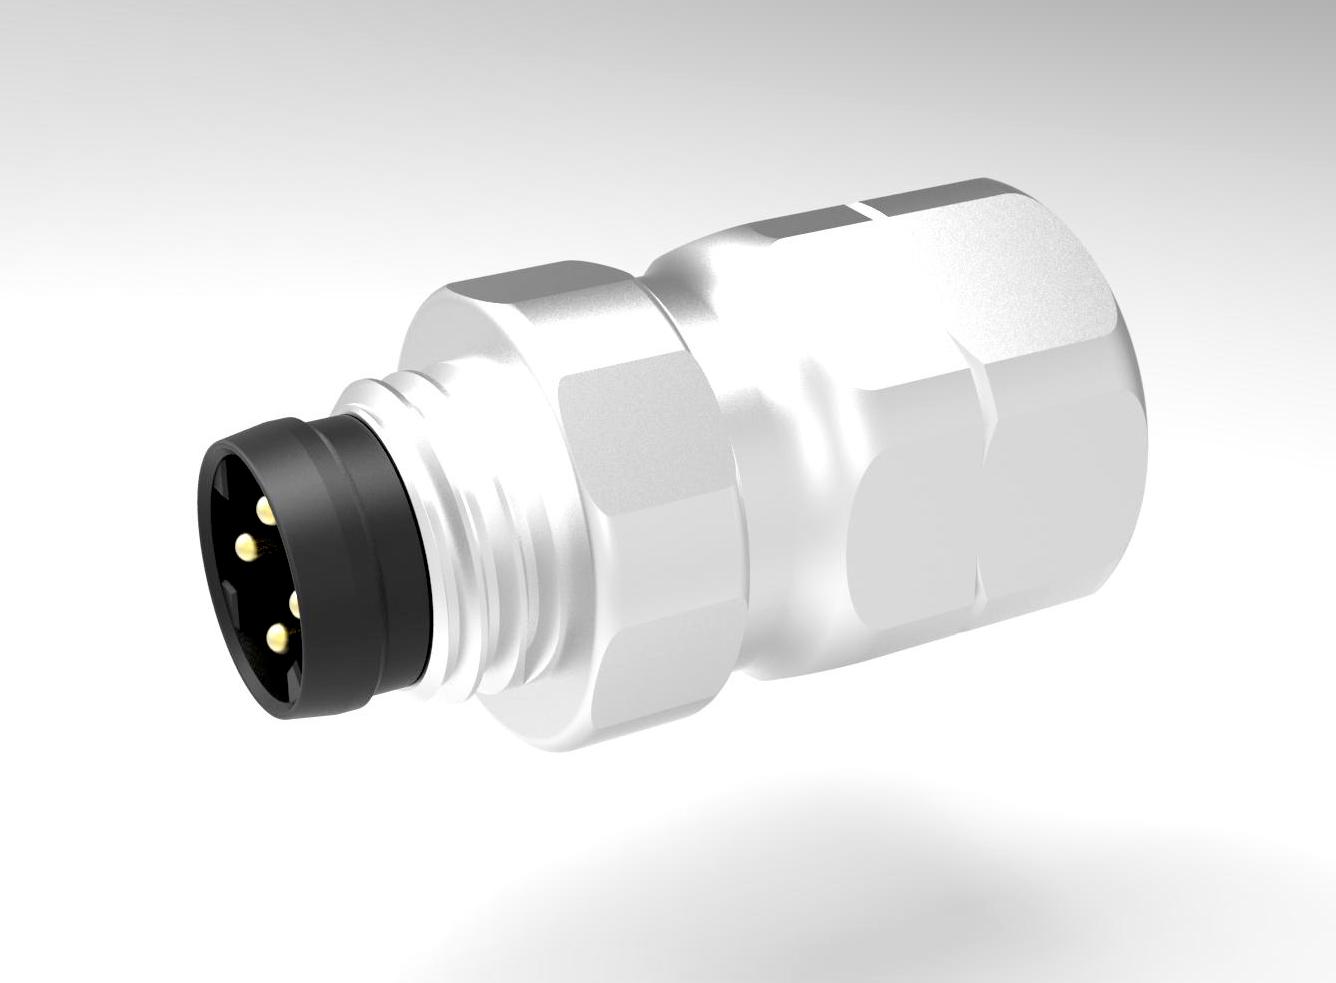 New connector from Provertha - V4A-M8 connectors